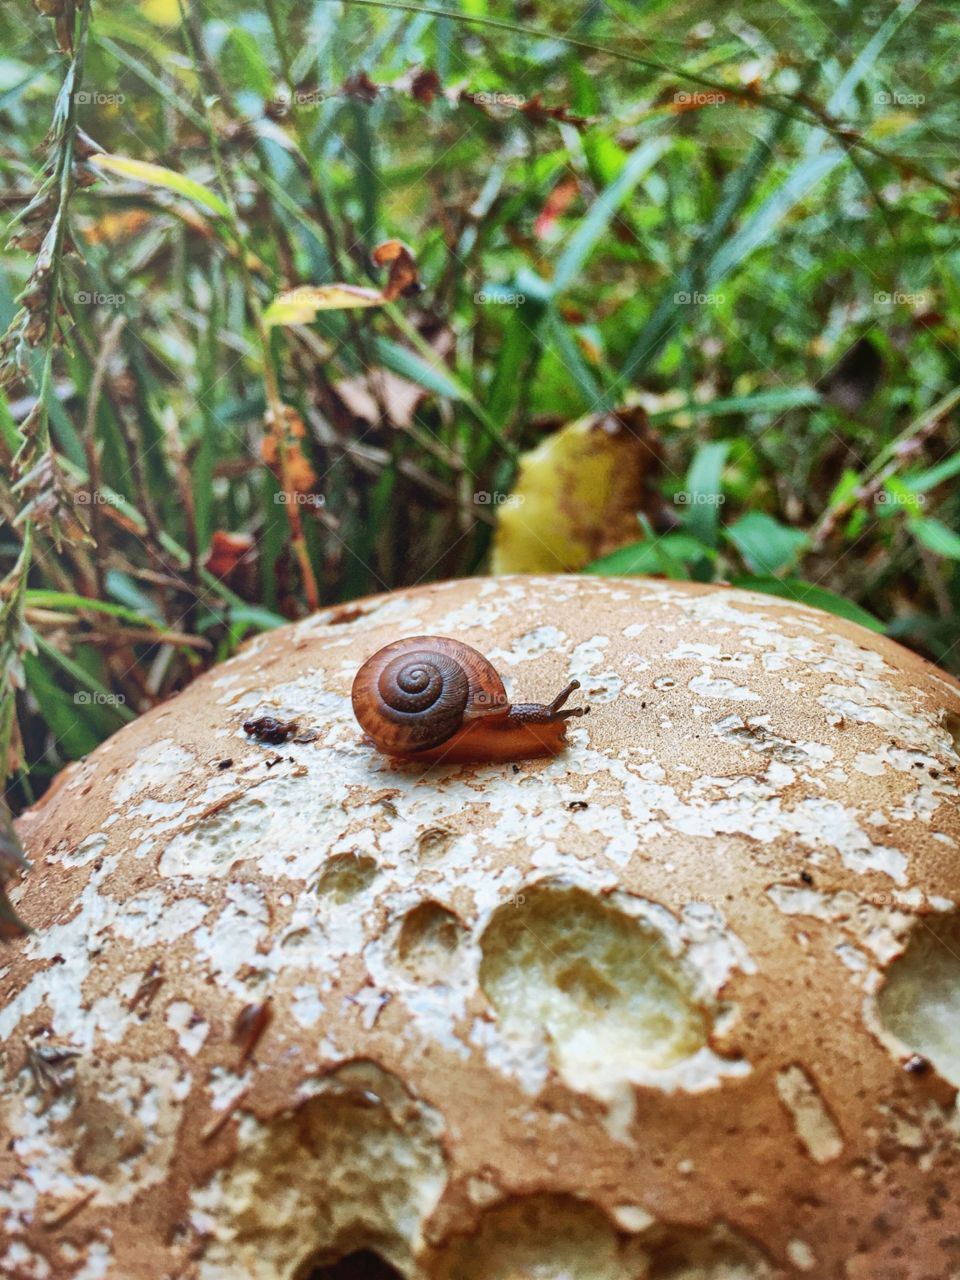 The snail and the mushroom. This shot was taken in my grandmothers garden 